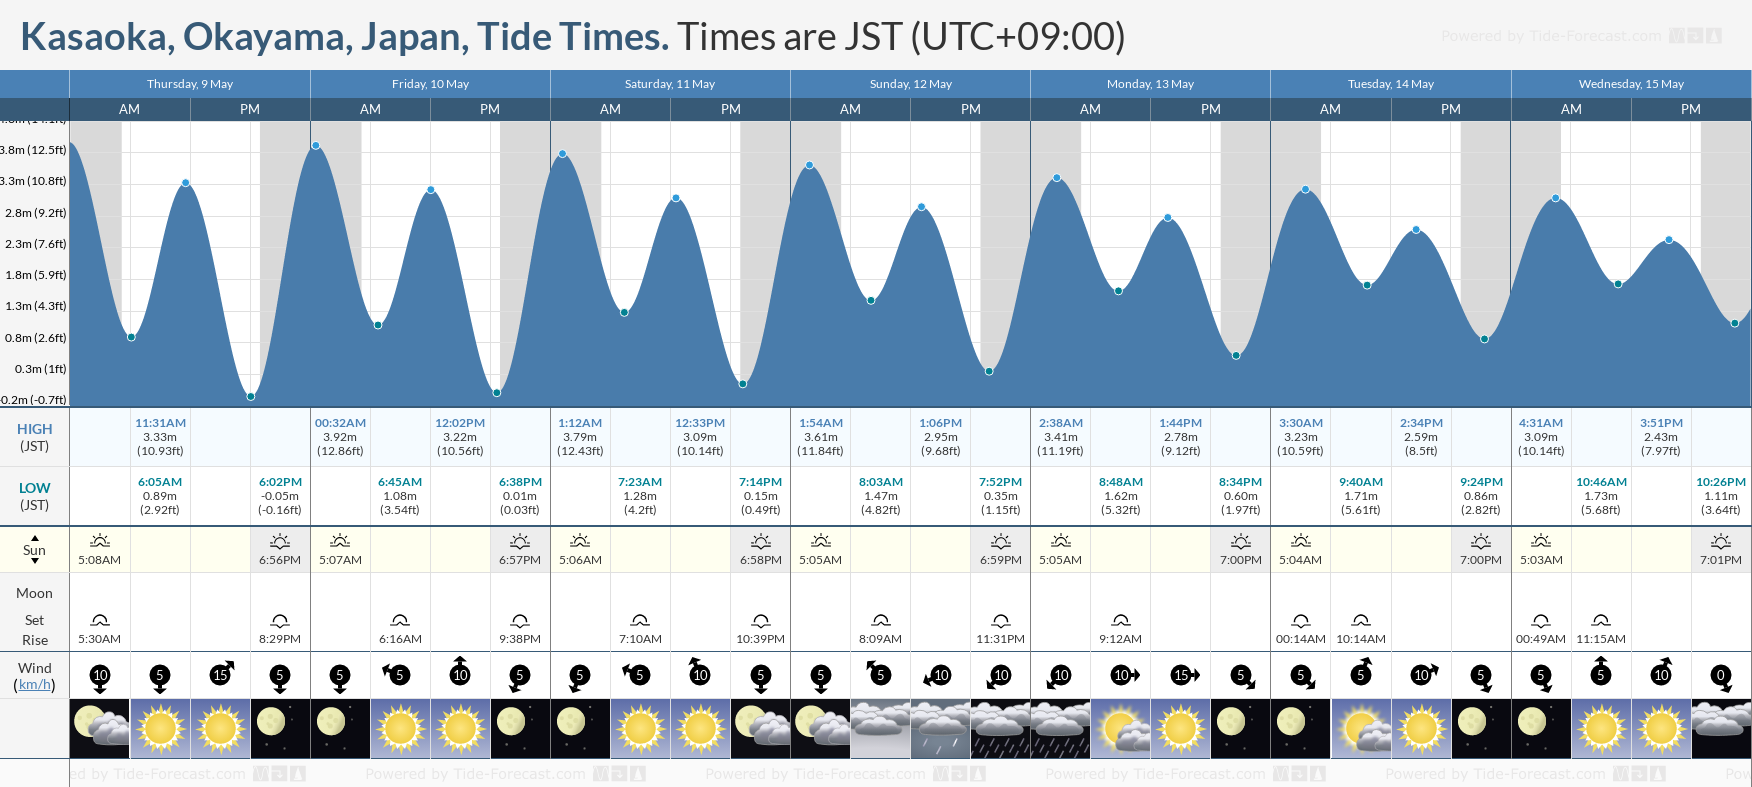 Kasaoka, Okayama, Japan Tide Chart including high and low tide tide times for the next 7 days